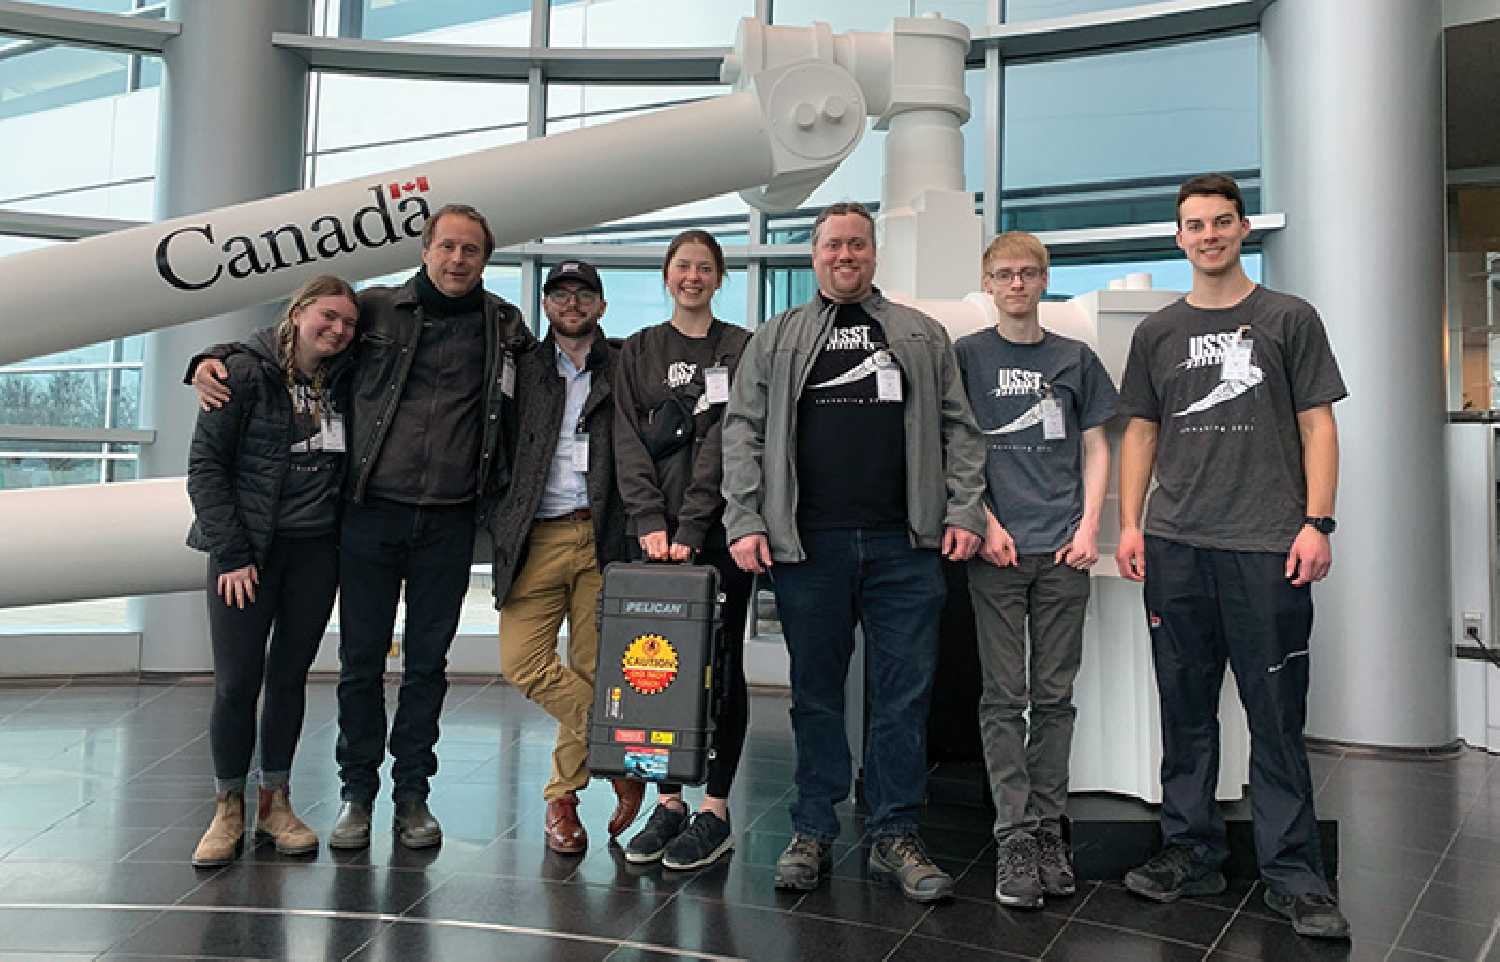 Ryan Aulie has been part of the RADSAT-SK project at the University of Saskatchewan. He and fellow students visited the Canadian Space Agency headquarters in Montreal, and will be in Cape Canaveral, Florida June 3 as the satellite is launched toward the International Space Station.